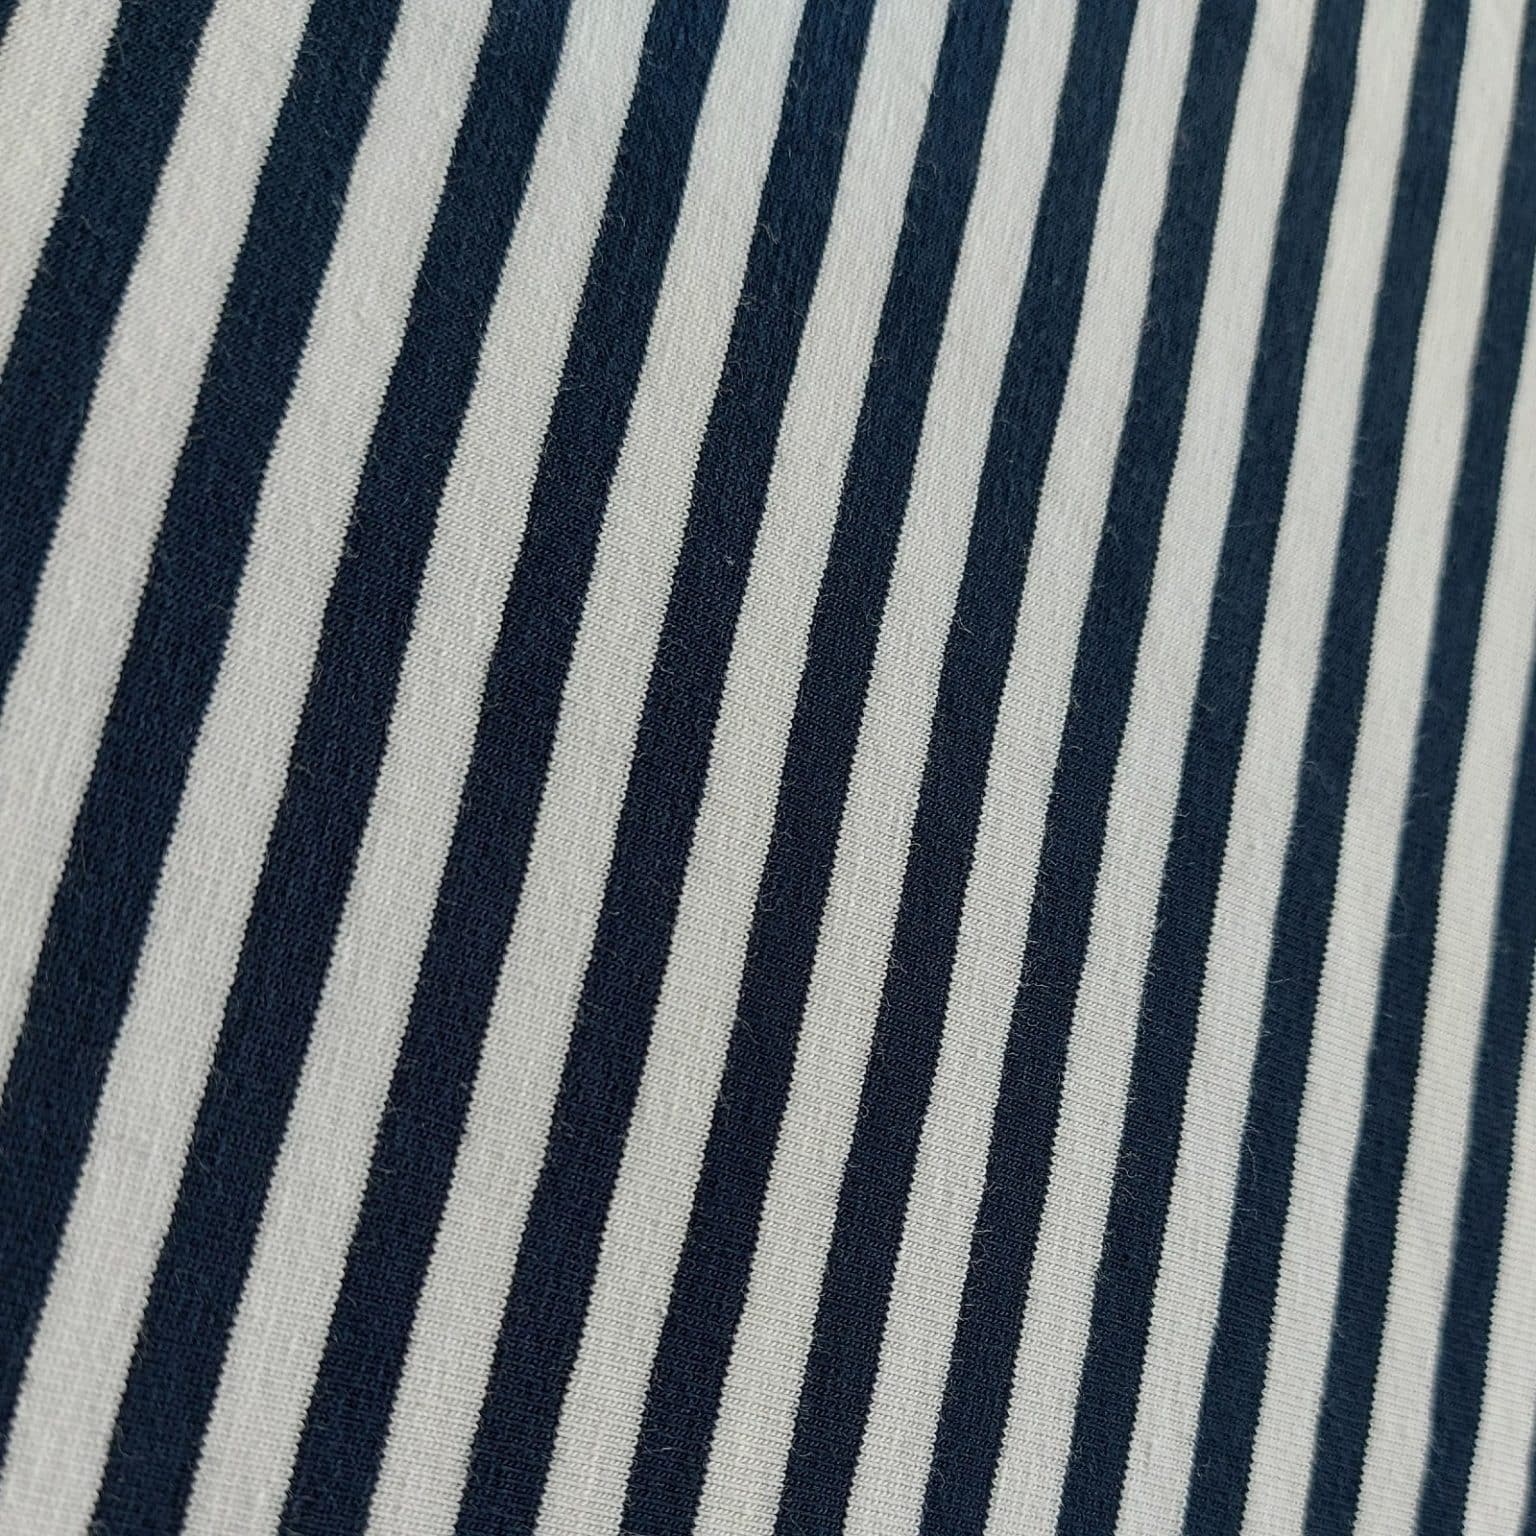 Yarn Dyed Stripe Jersey at More Sewing